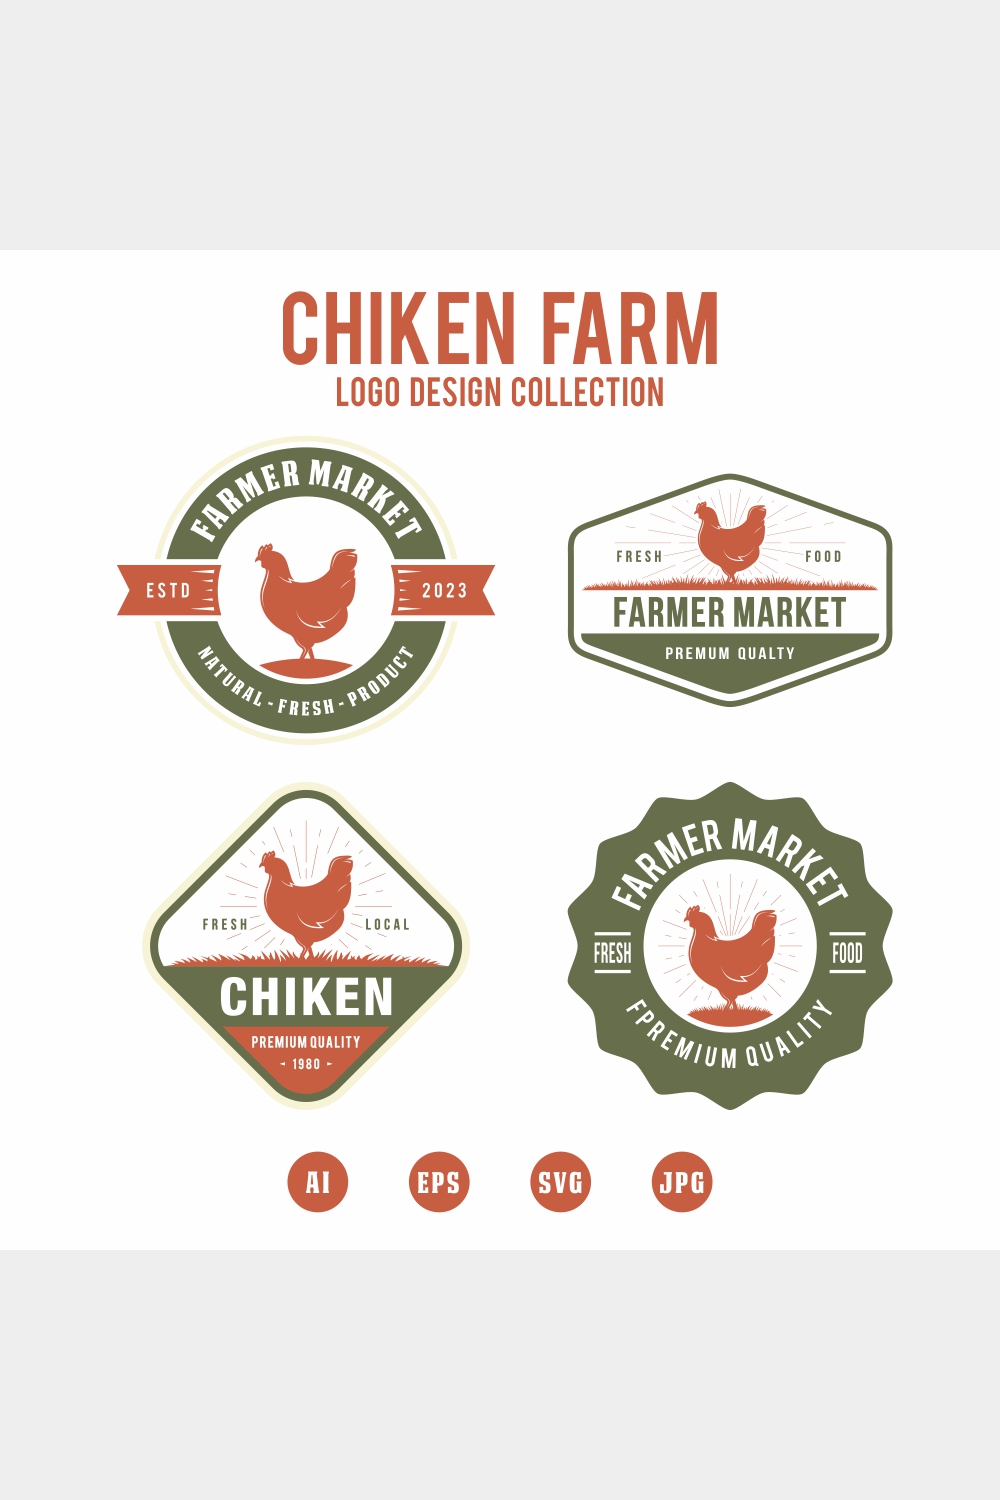 Chicken Farm logo design collection - only 7$ pinterest preview image.